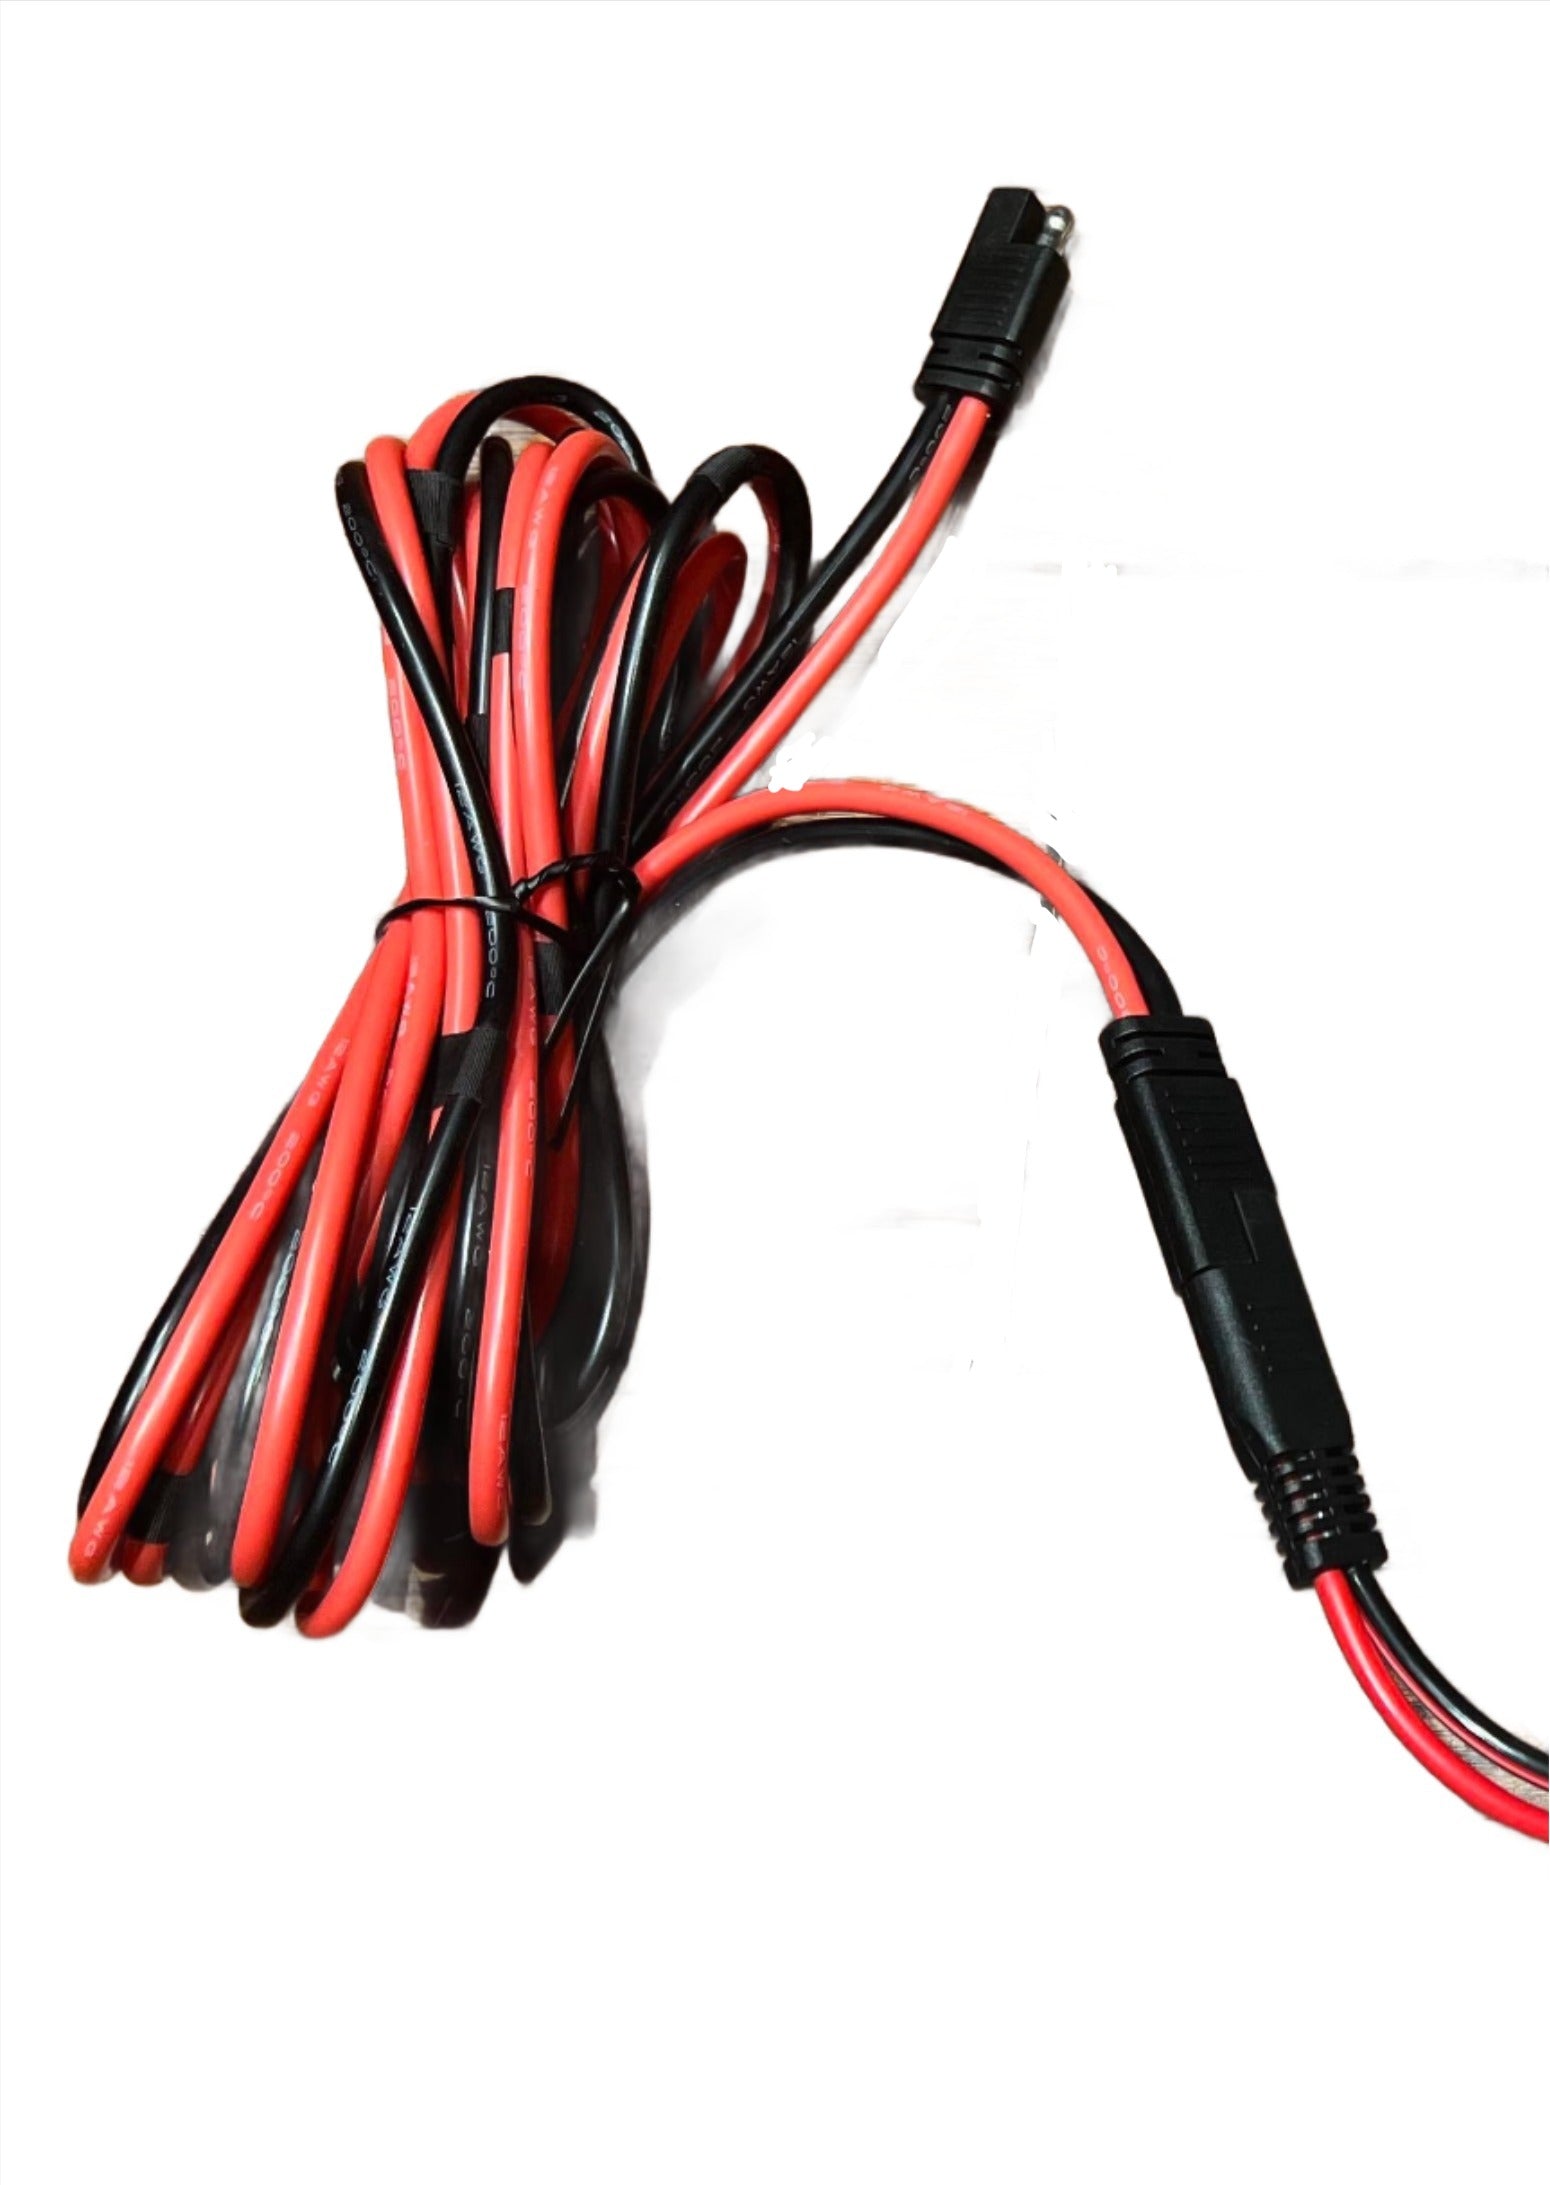 Extra DC Power Cable for All in One 12v Star-Mount Version 2 (No Step Up on Cable)